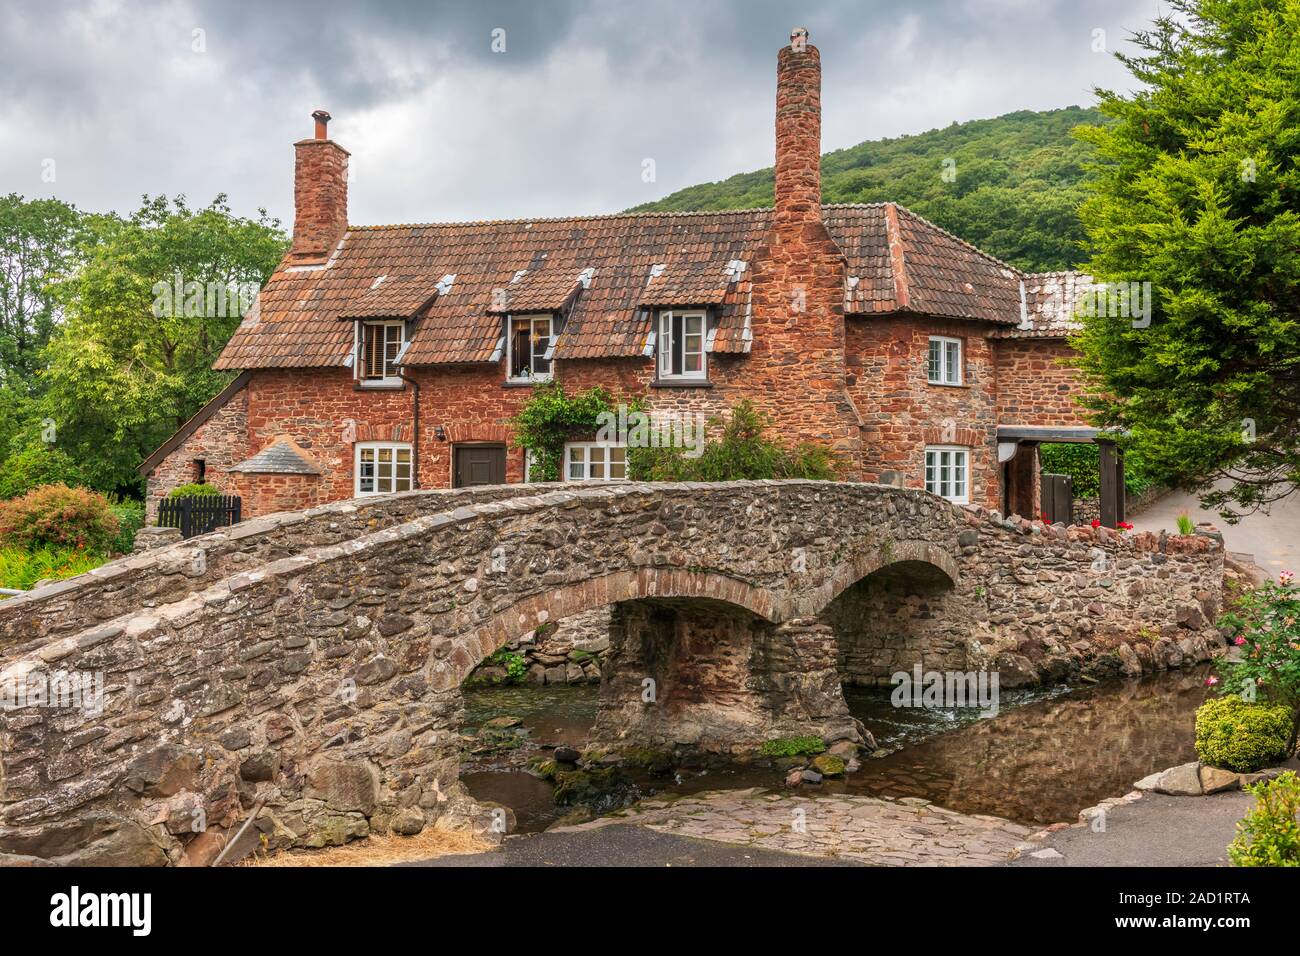 Hidden away, not far from the village of Porlock in rural Somerset, a bridge crosses a stream leading to a picturesque cottage and woodland beyond. Stock Photo